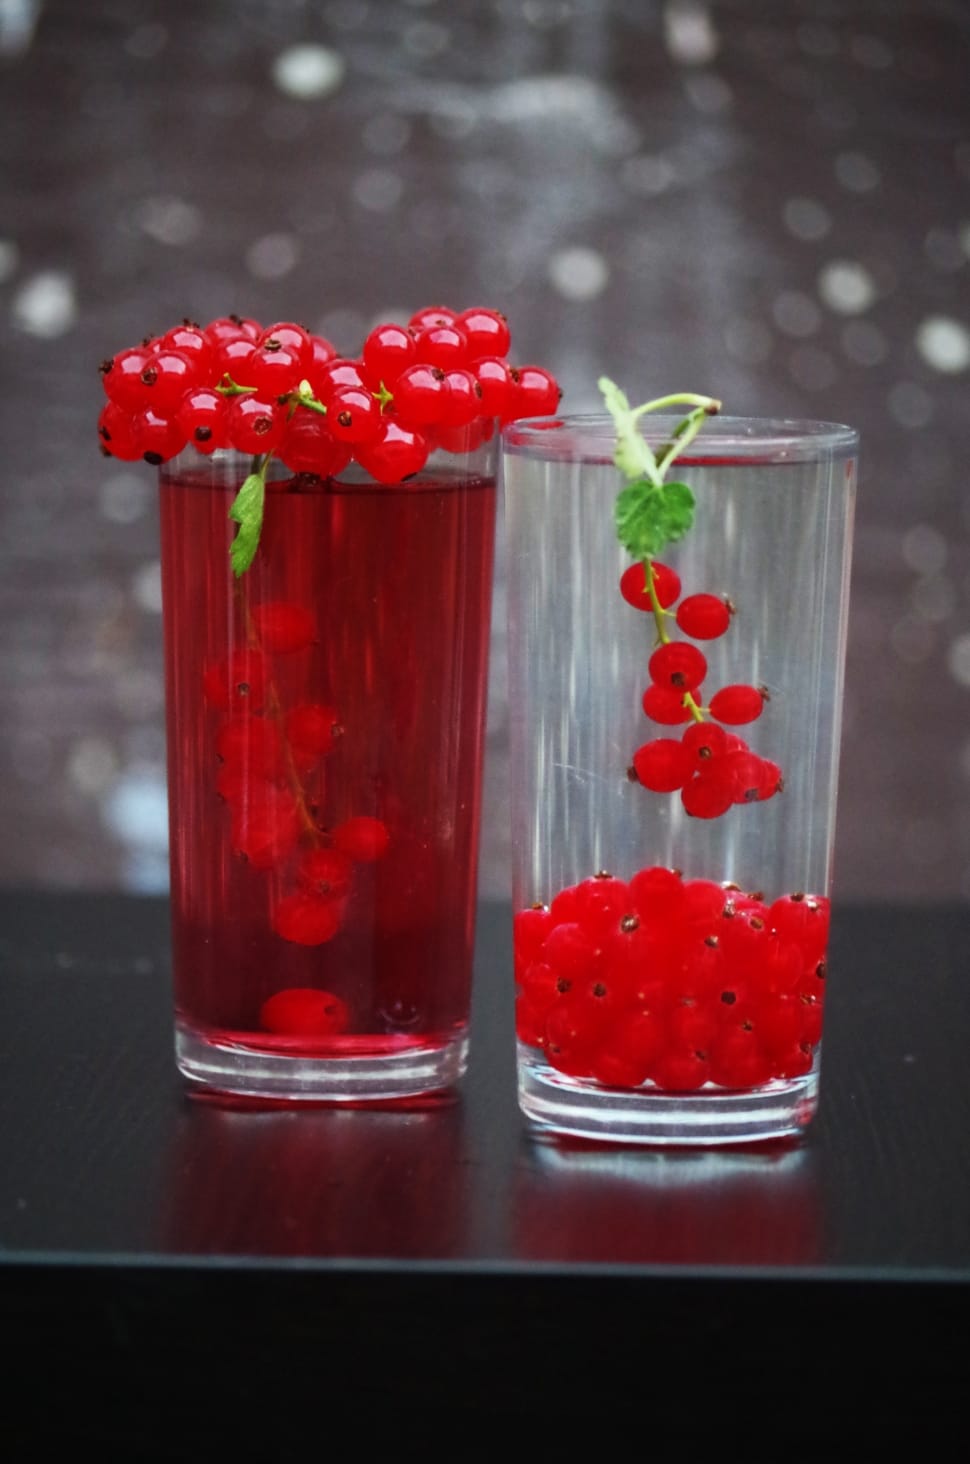 red round fruits in side clear drinking glass with liquids inside preview